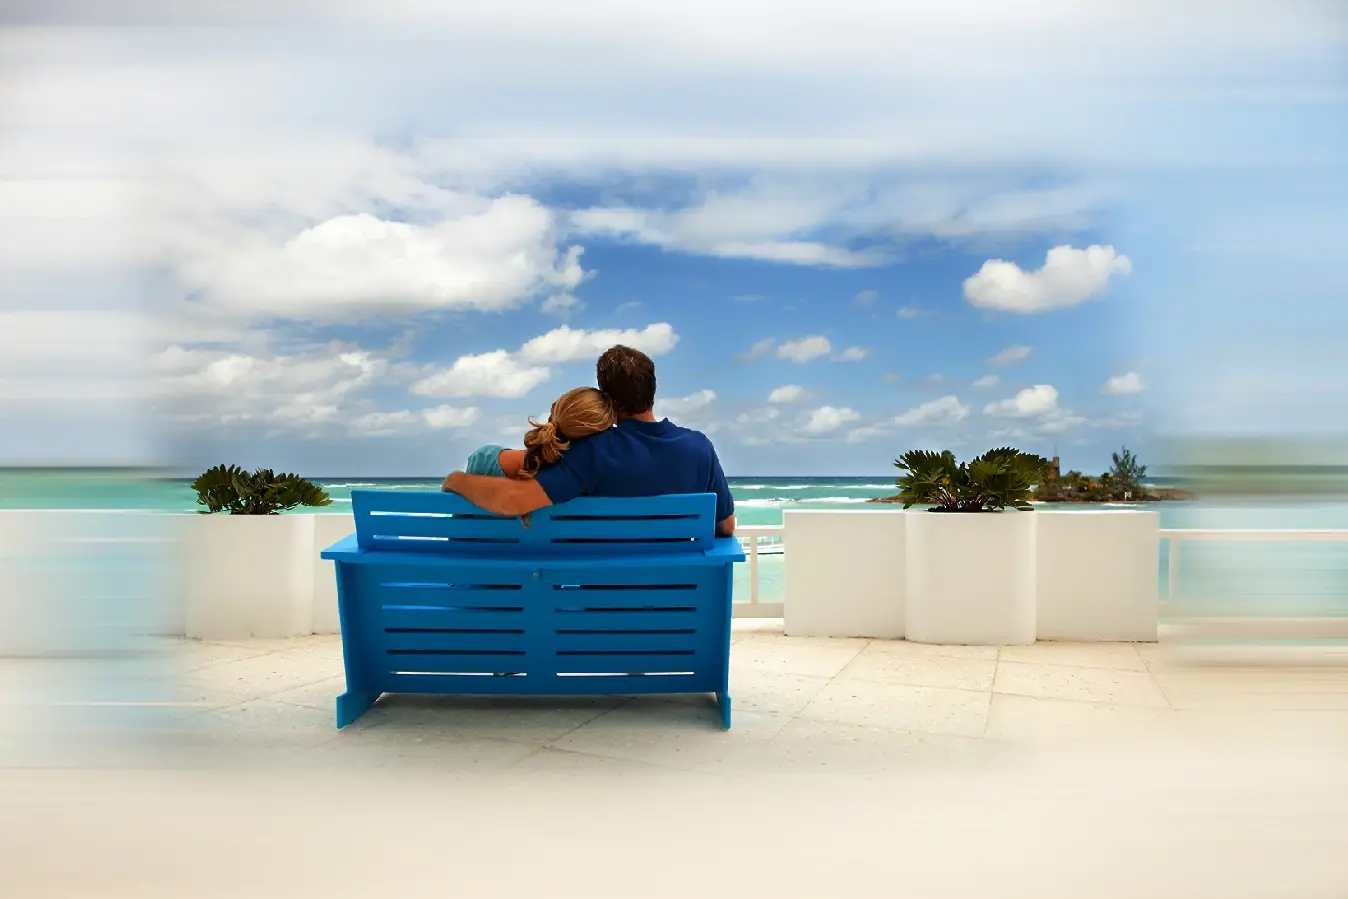  Cheap Caribbean Vacation Destinations for Couples